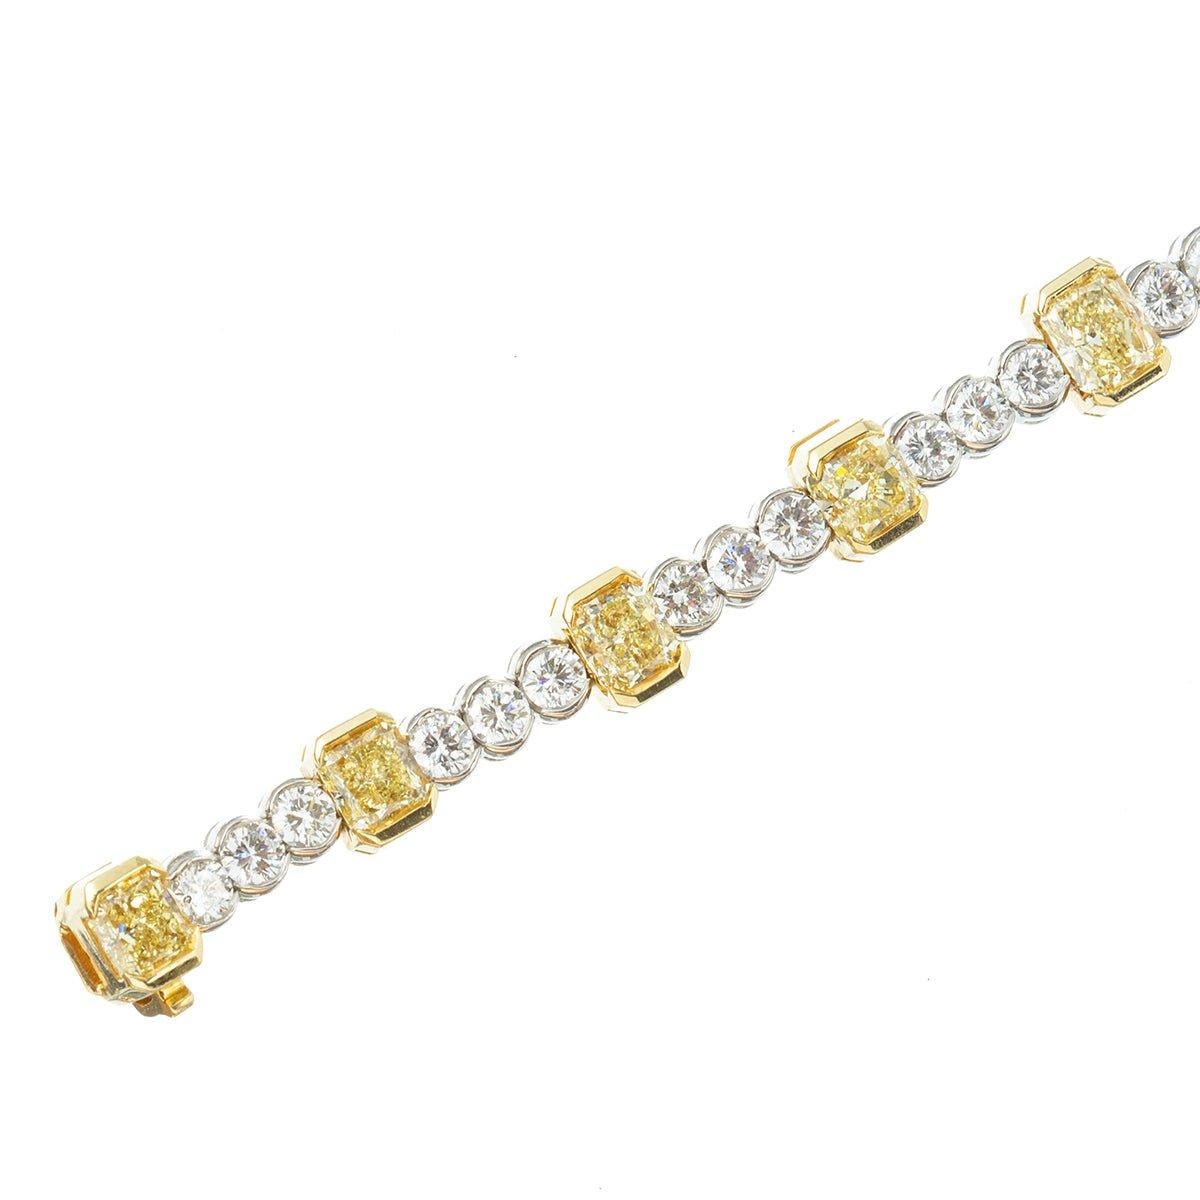 Bezel-set yellow and white diamond line bracelet, featuring larger radiant-cut natural fancy yellow diamonds each separated by three smaller near-colorless round brilliant-cut diamonds, in a polished platinum and 18k yellow gold setting. Eleven